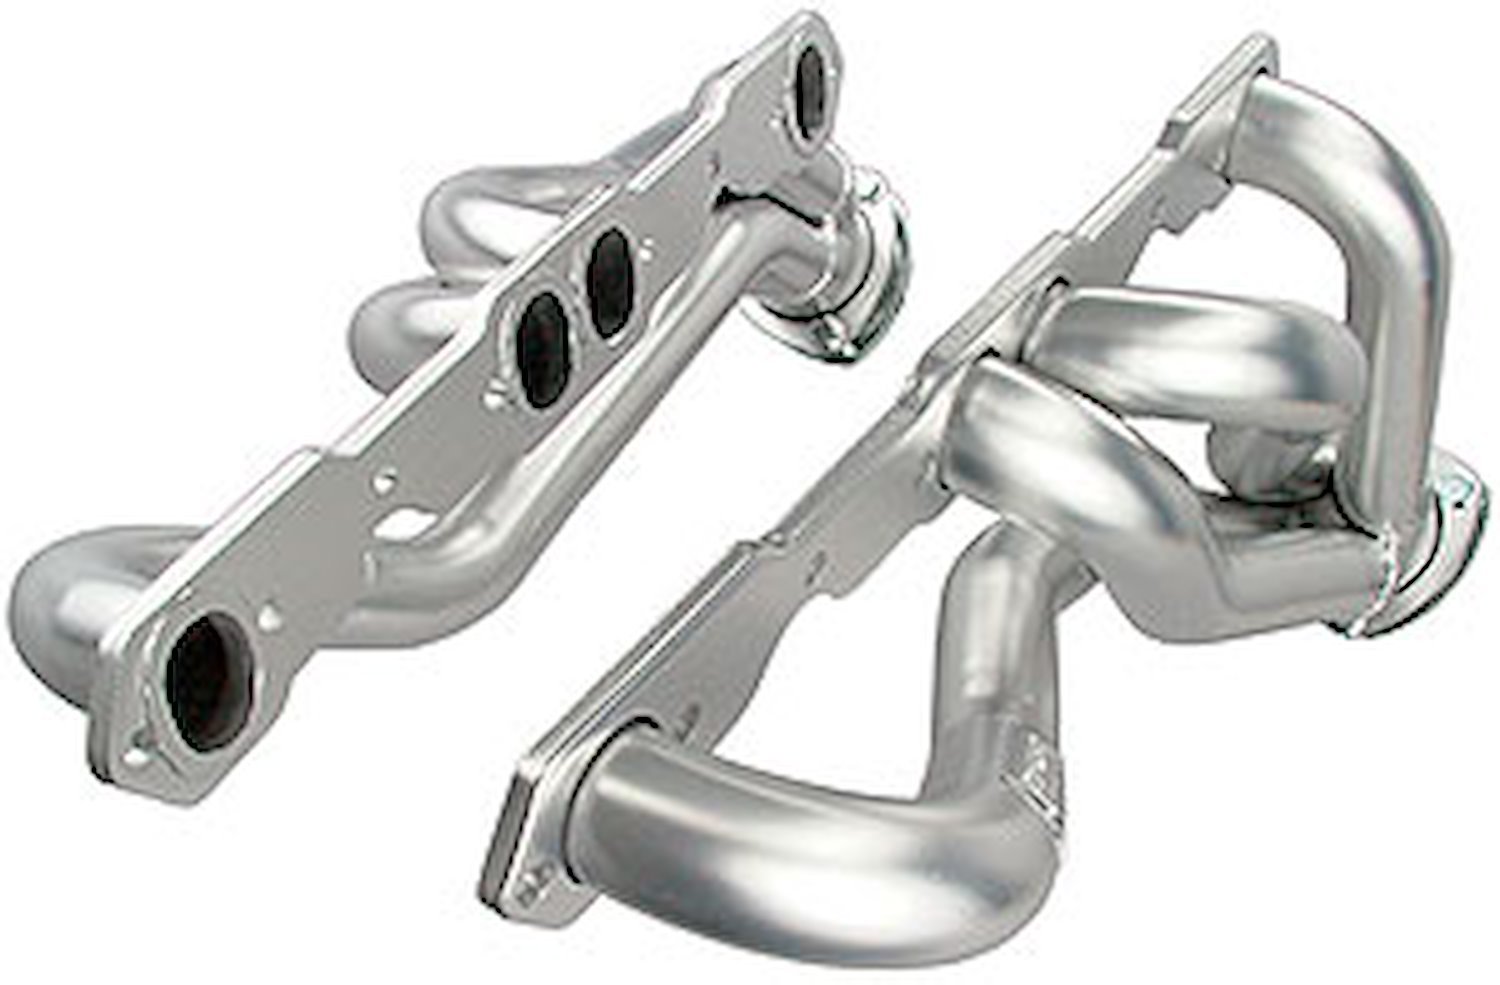 Stainless Steel Headers Multiple Application: Camaro, Chevelle, Monte Carlo, Cutlass and more